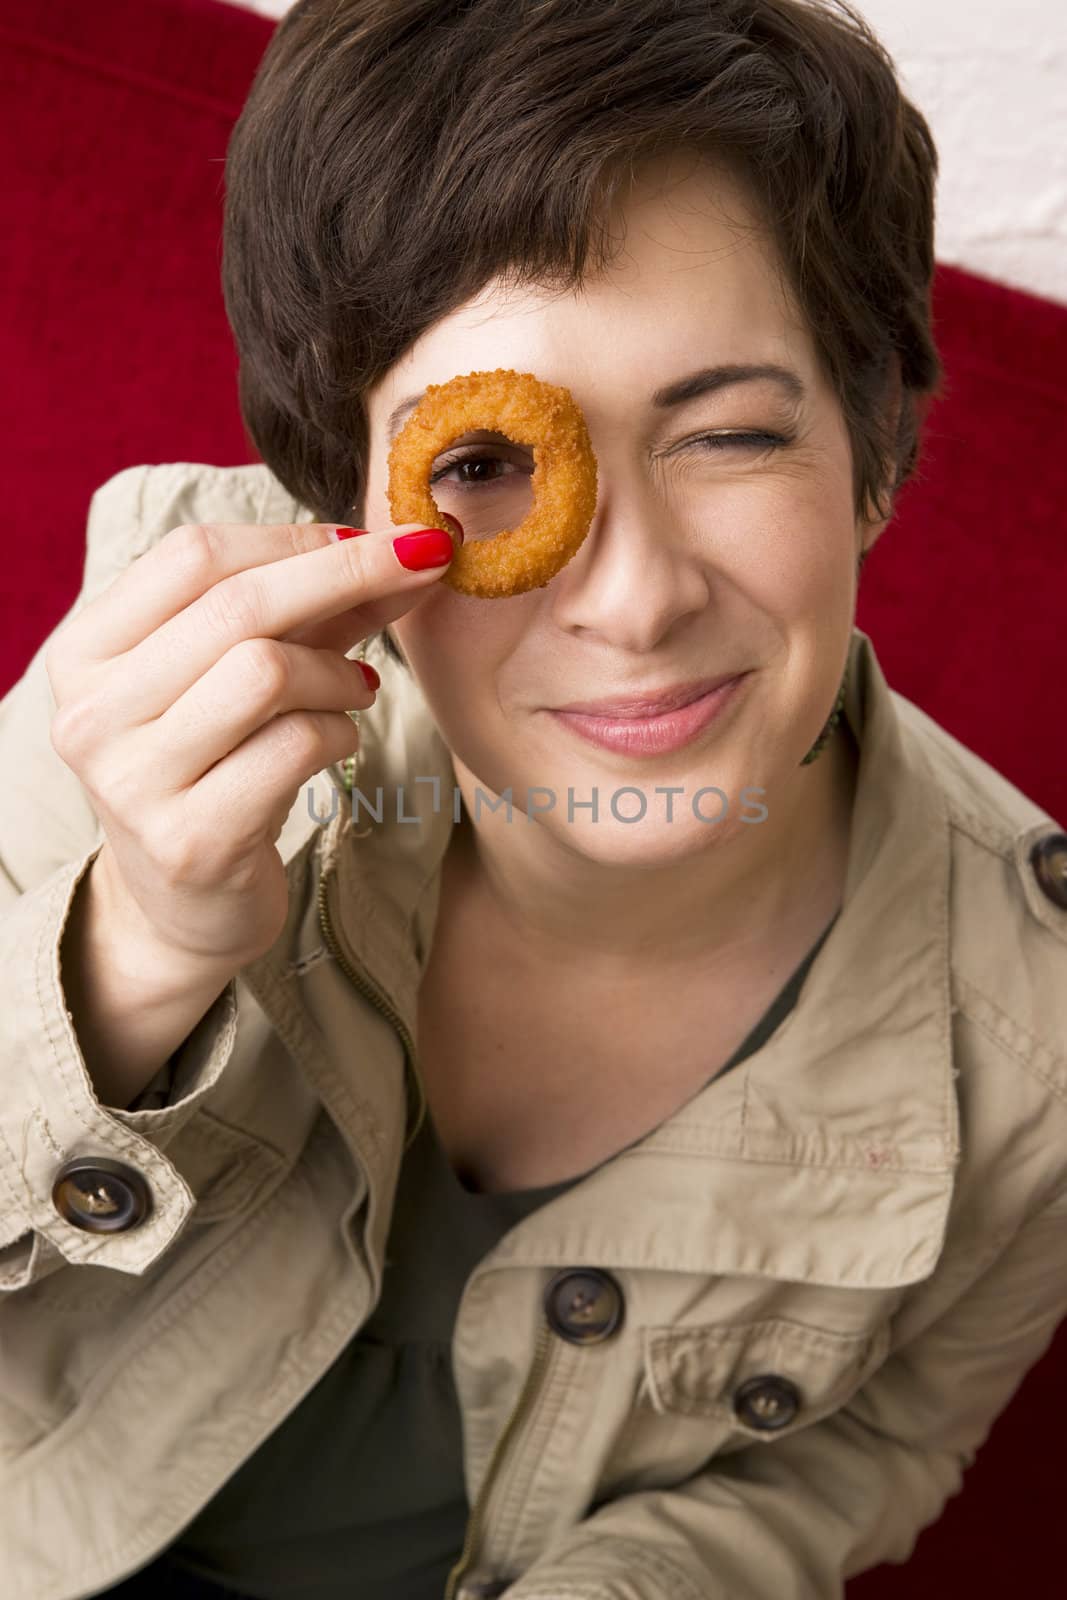 Onion Ring Eye by ChrisBoswell